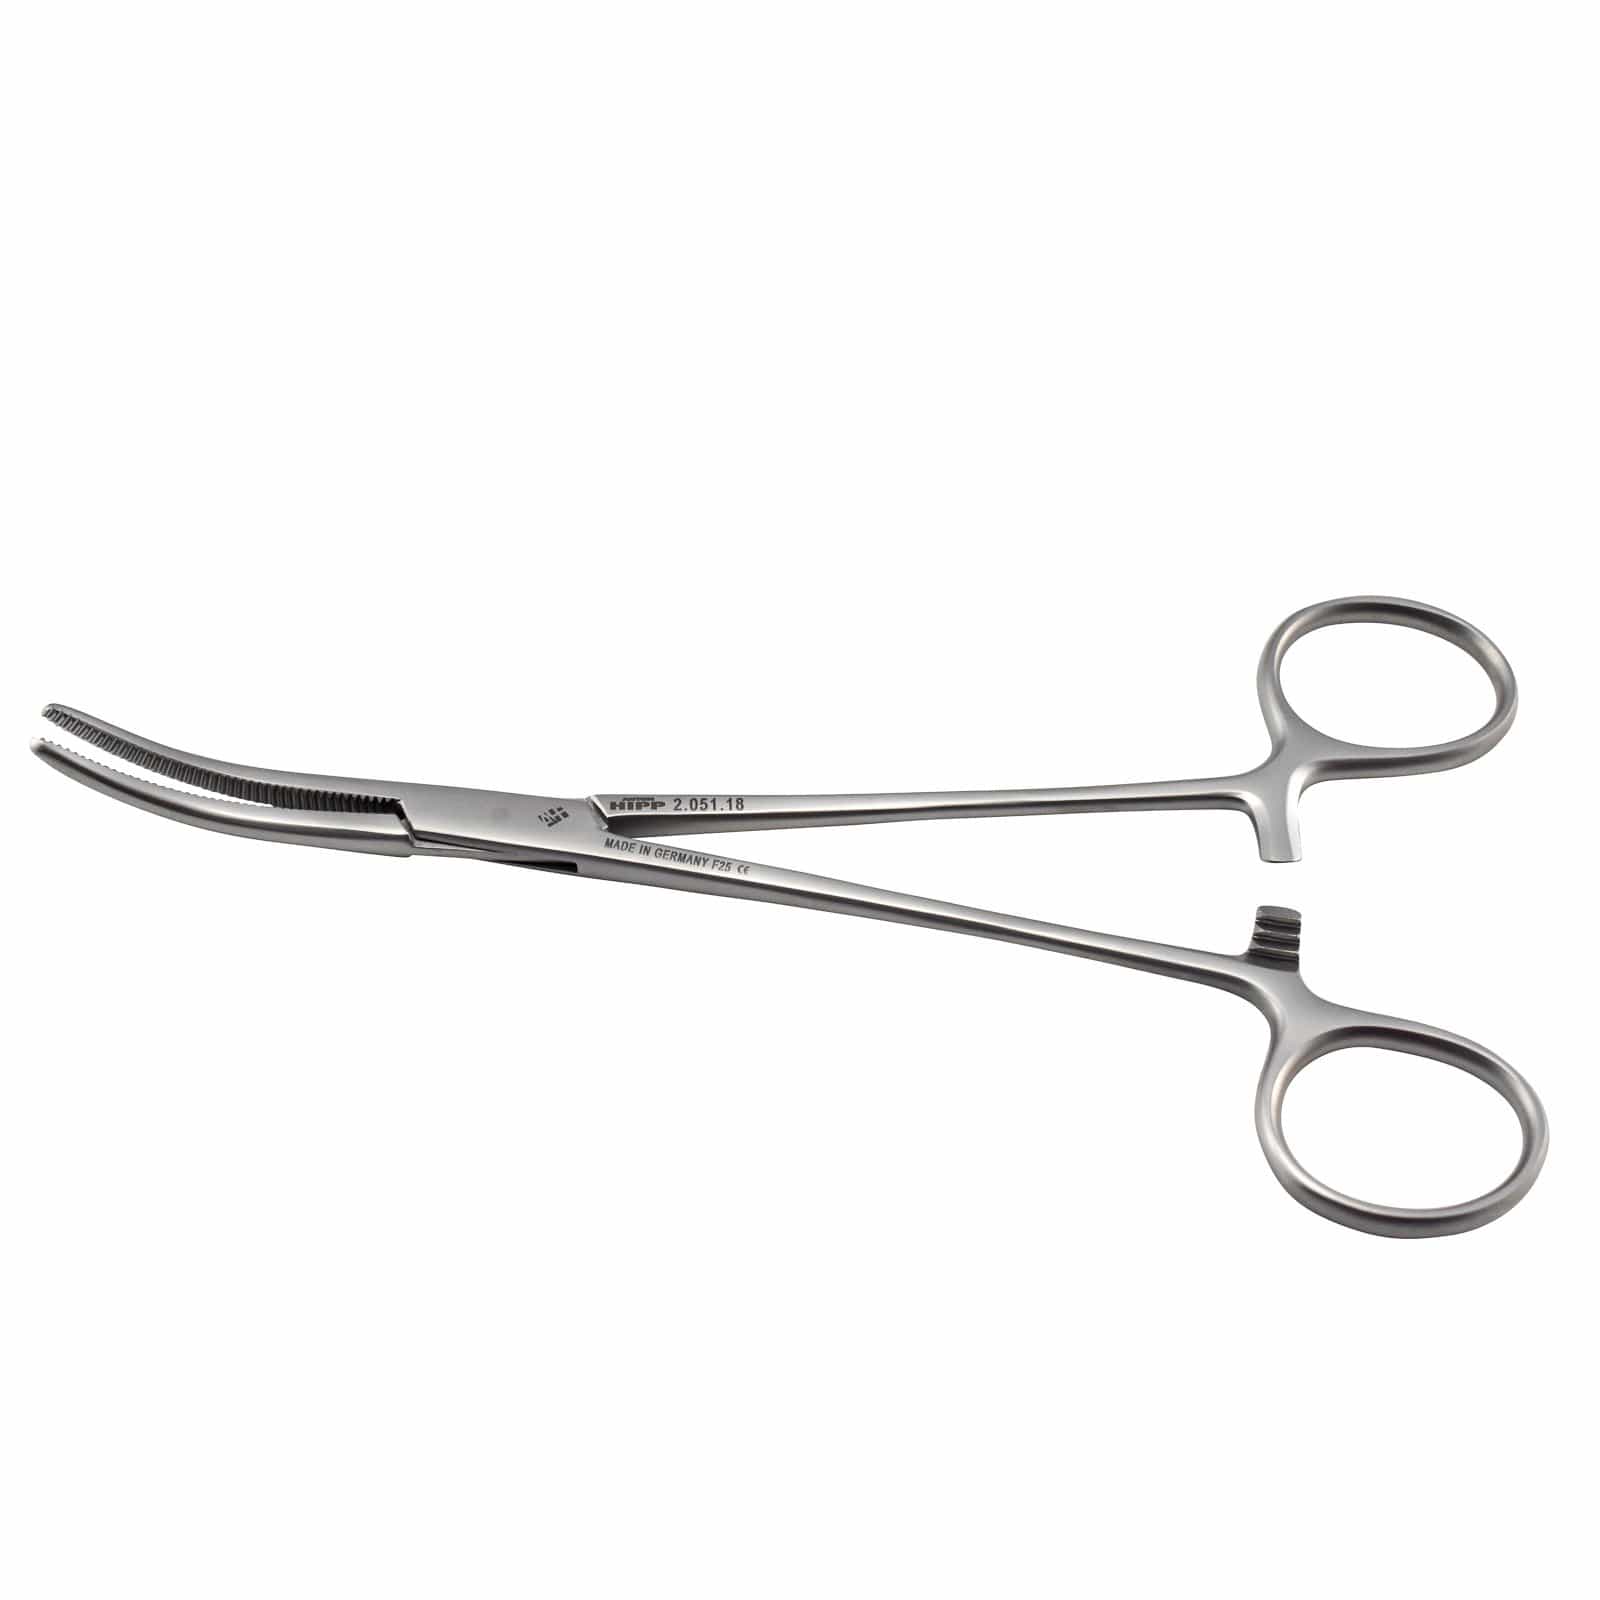 Hipp Surgical Instruments 18cm / Curved Hipp Spencer Wells Artery Forceps